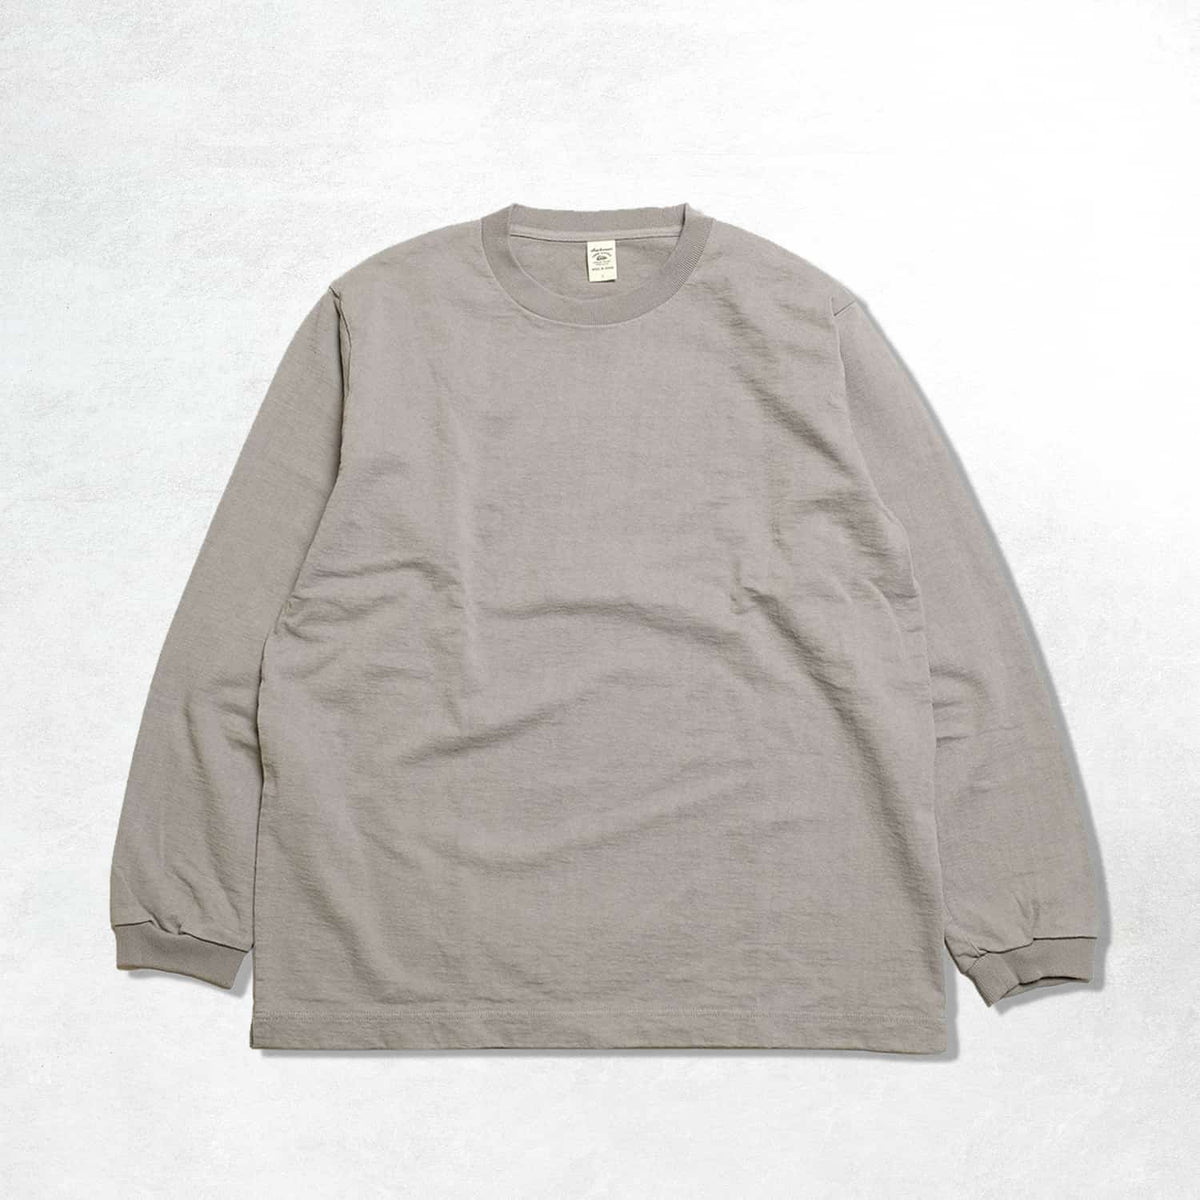 Jackman Dotsume L/S T-Shirt: Solid Gray – The Union Project